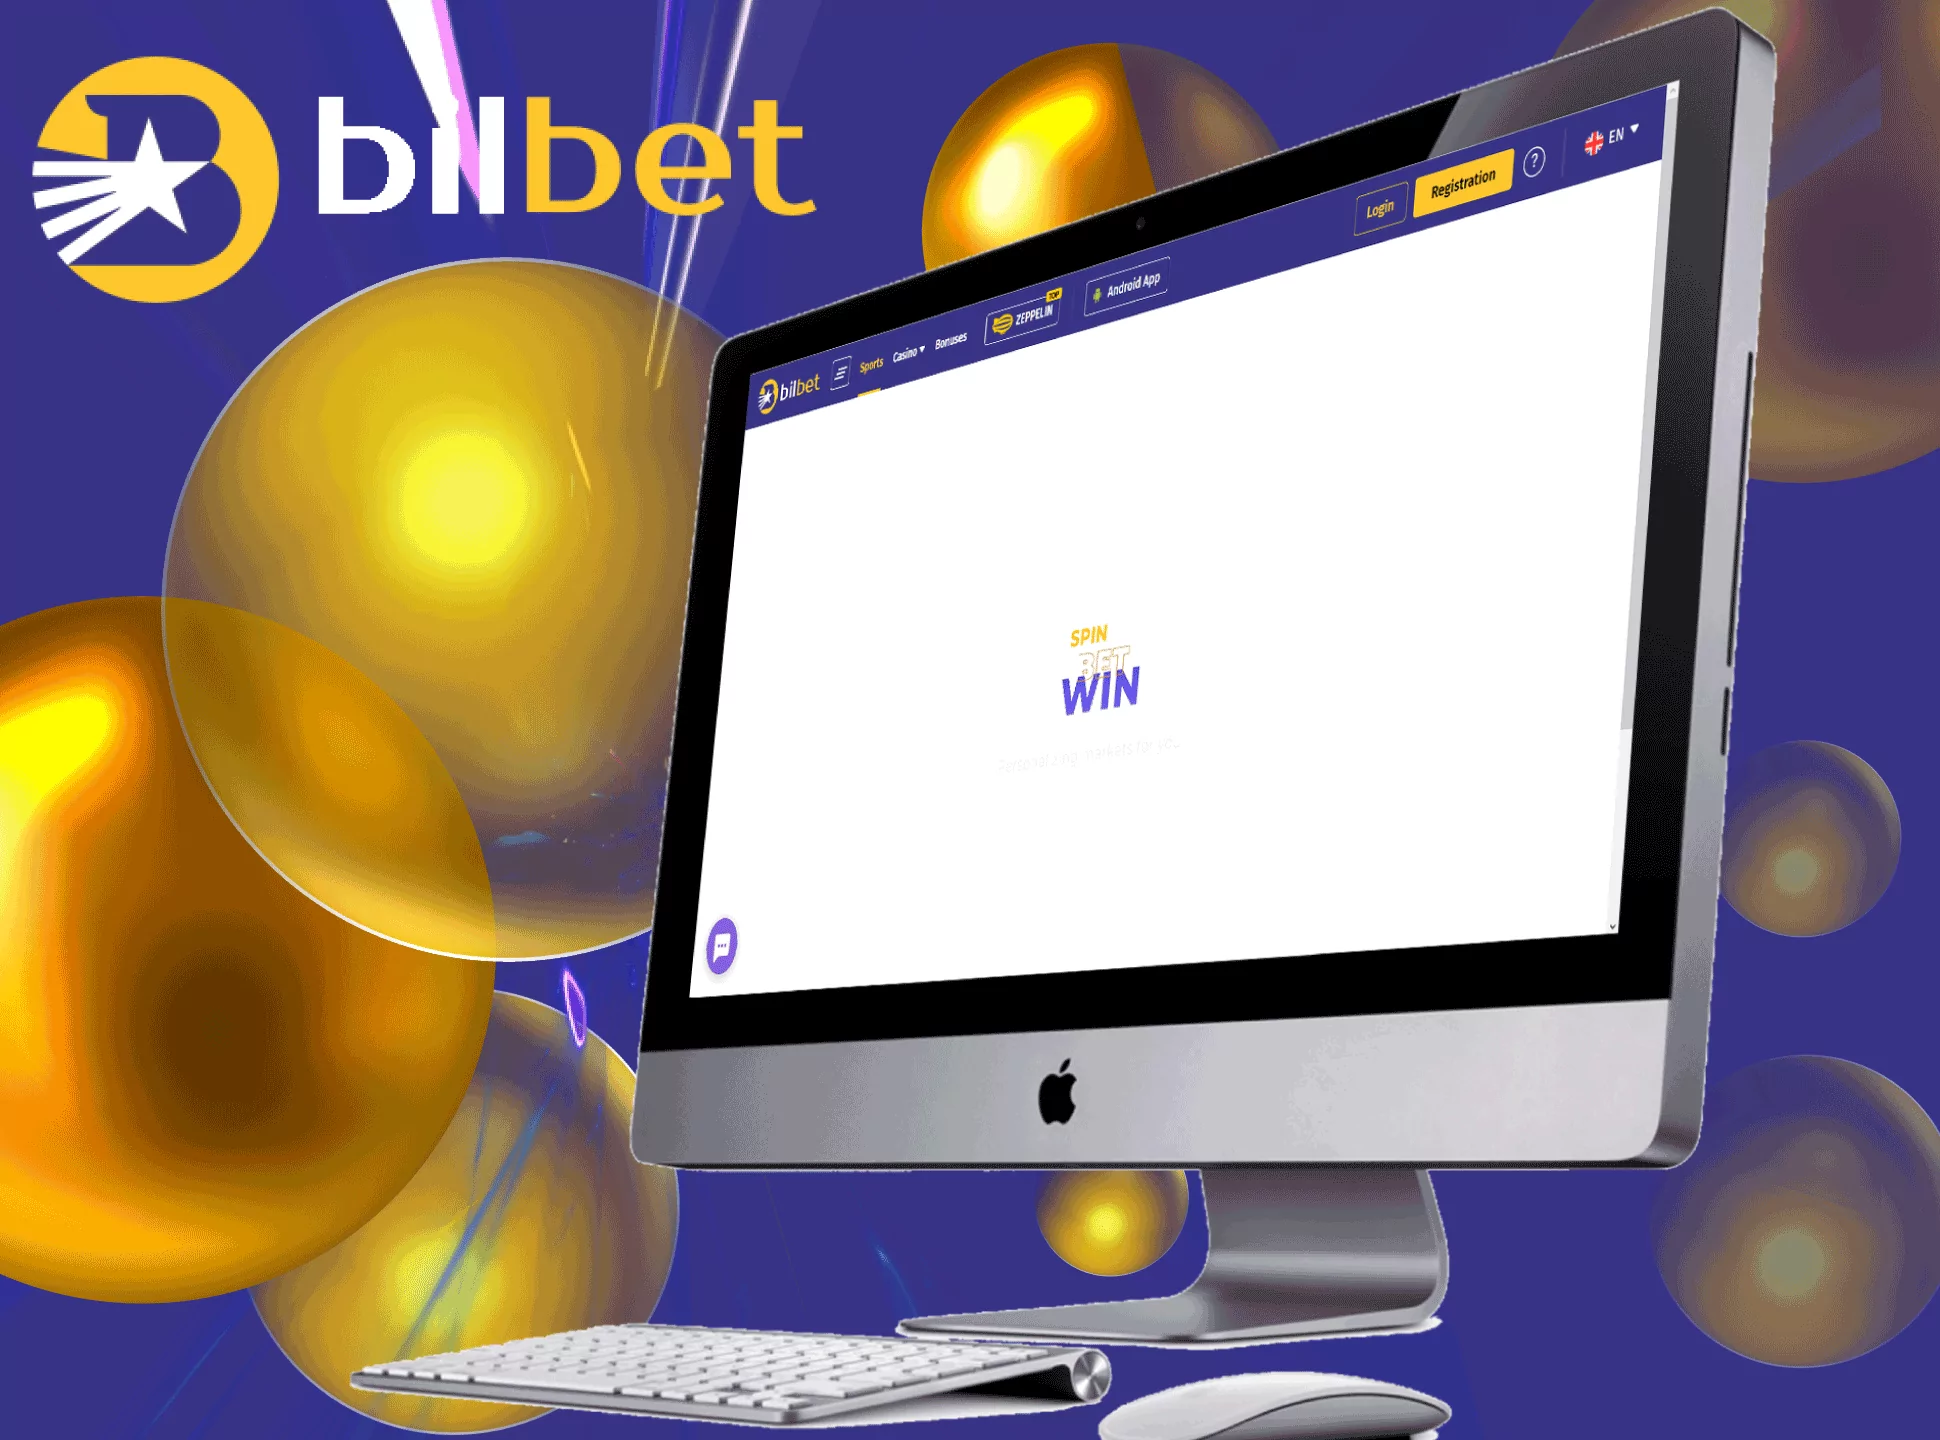 Install the Bilbet desktop version on your laptop and start betting.